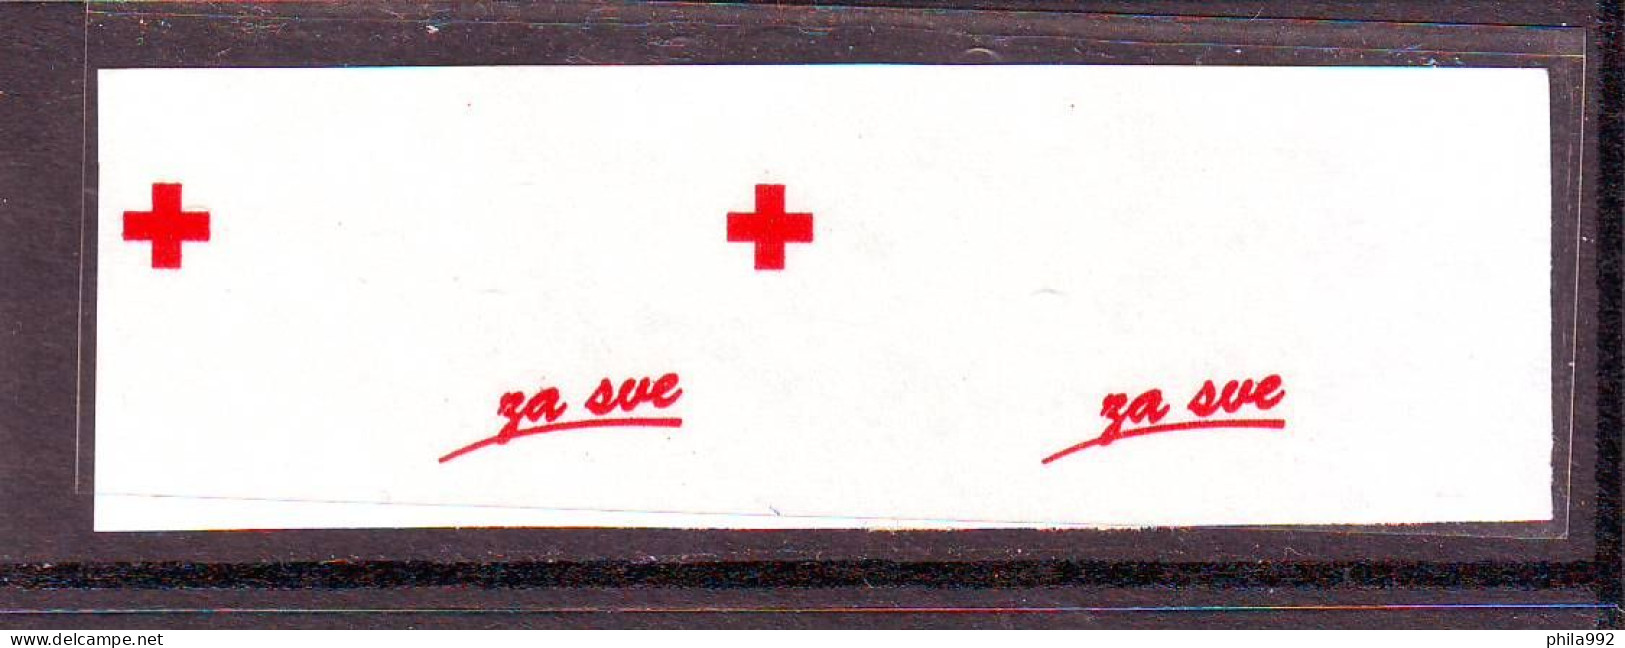 Croatia 1993 Charity Stamp Mi.No. 26 RED CROSS  Imperforate Pair Without Black Color    MNH - Kroatien